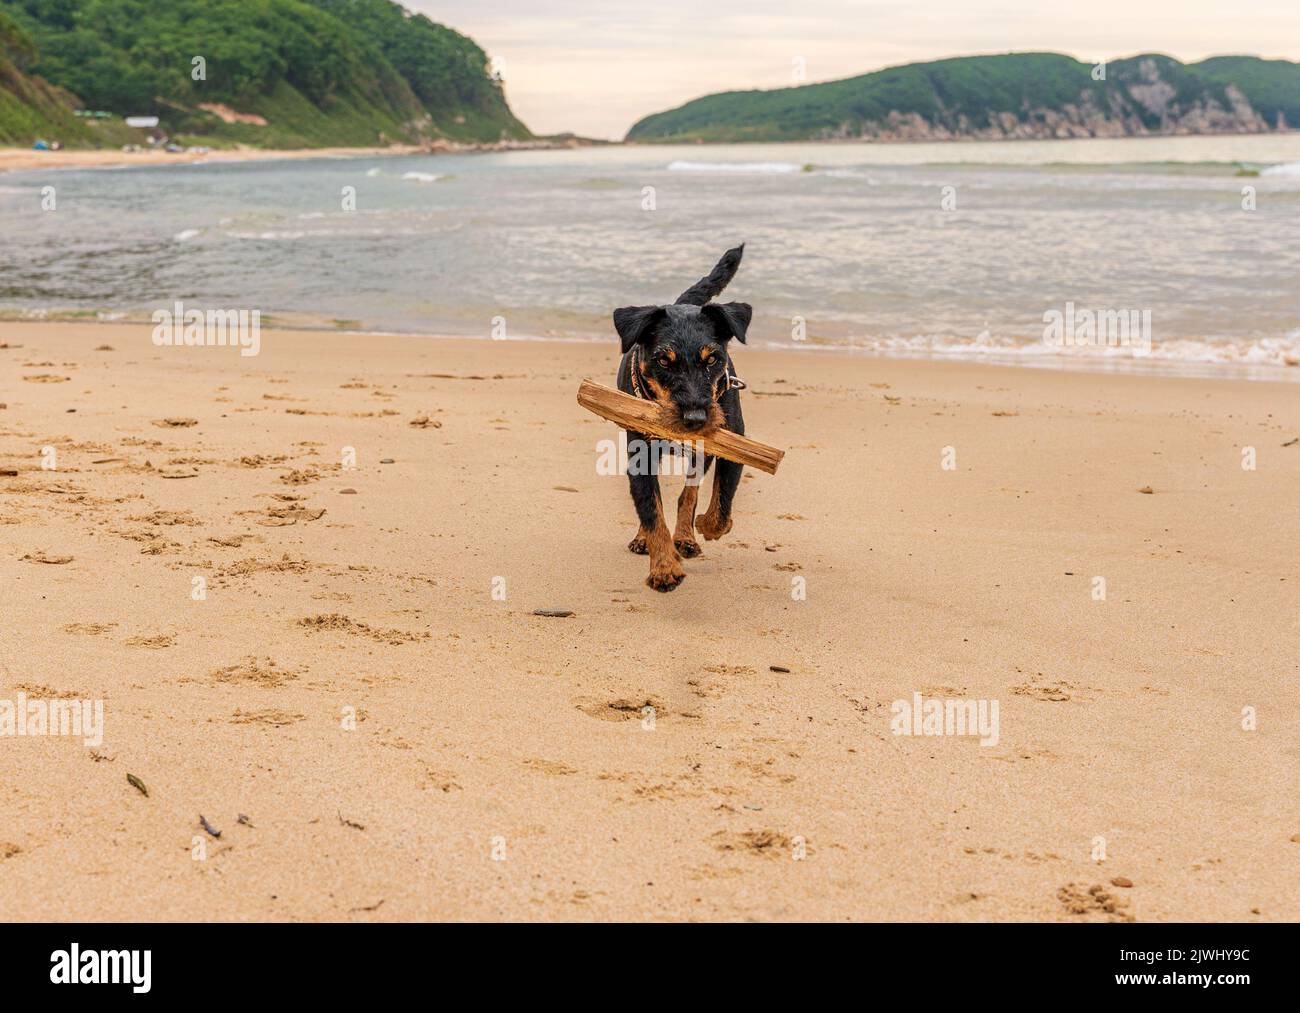 Adorable dog runs along the beach after a stick. High quality photo Stock Photo